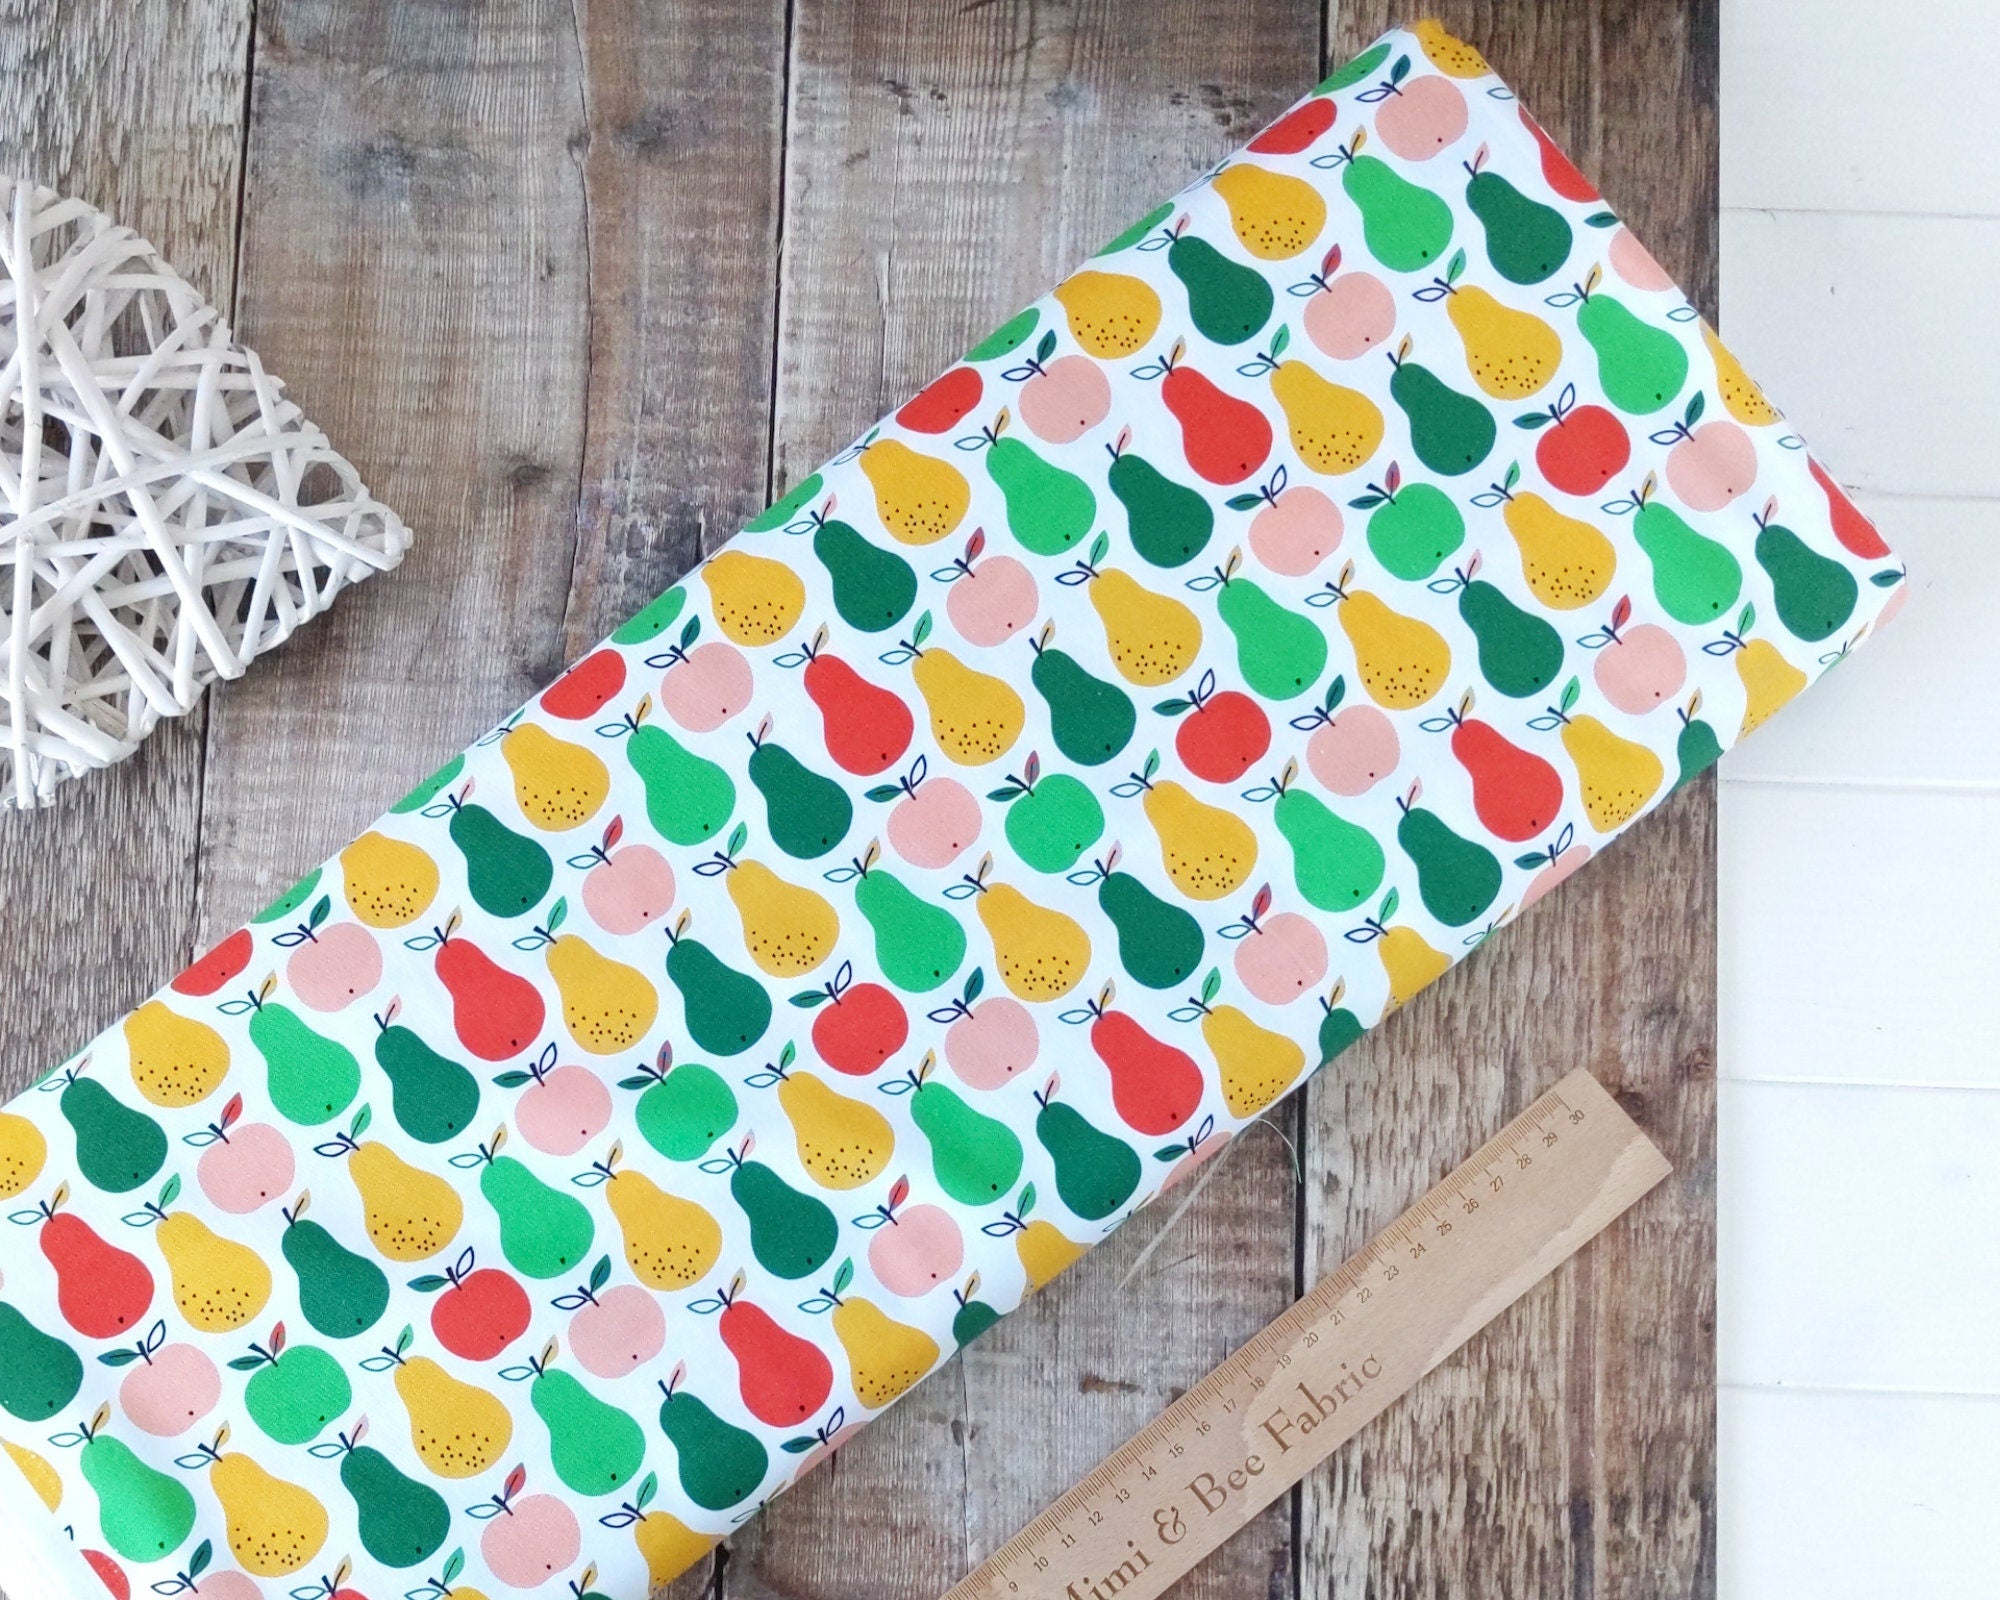 Apples and pears on white cotton fabric - Acorn Wood by Dashwood Studio